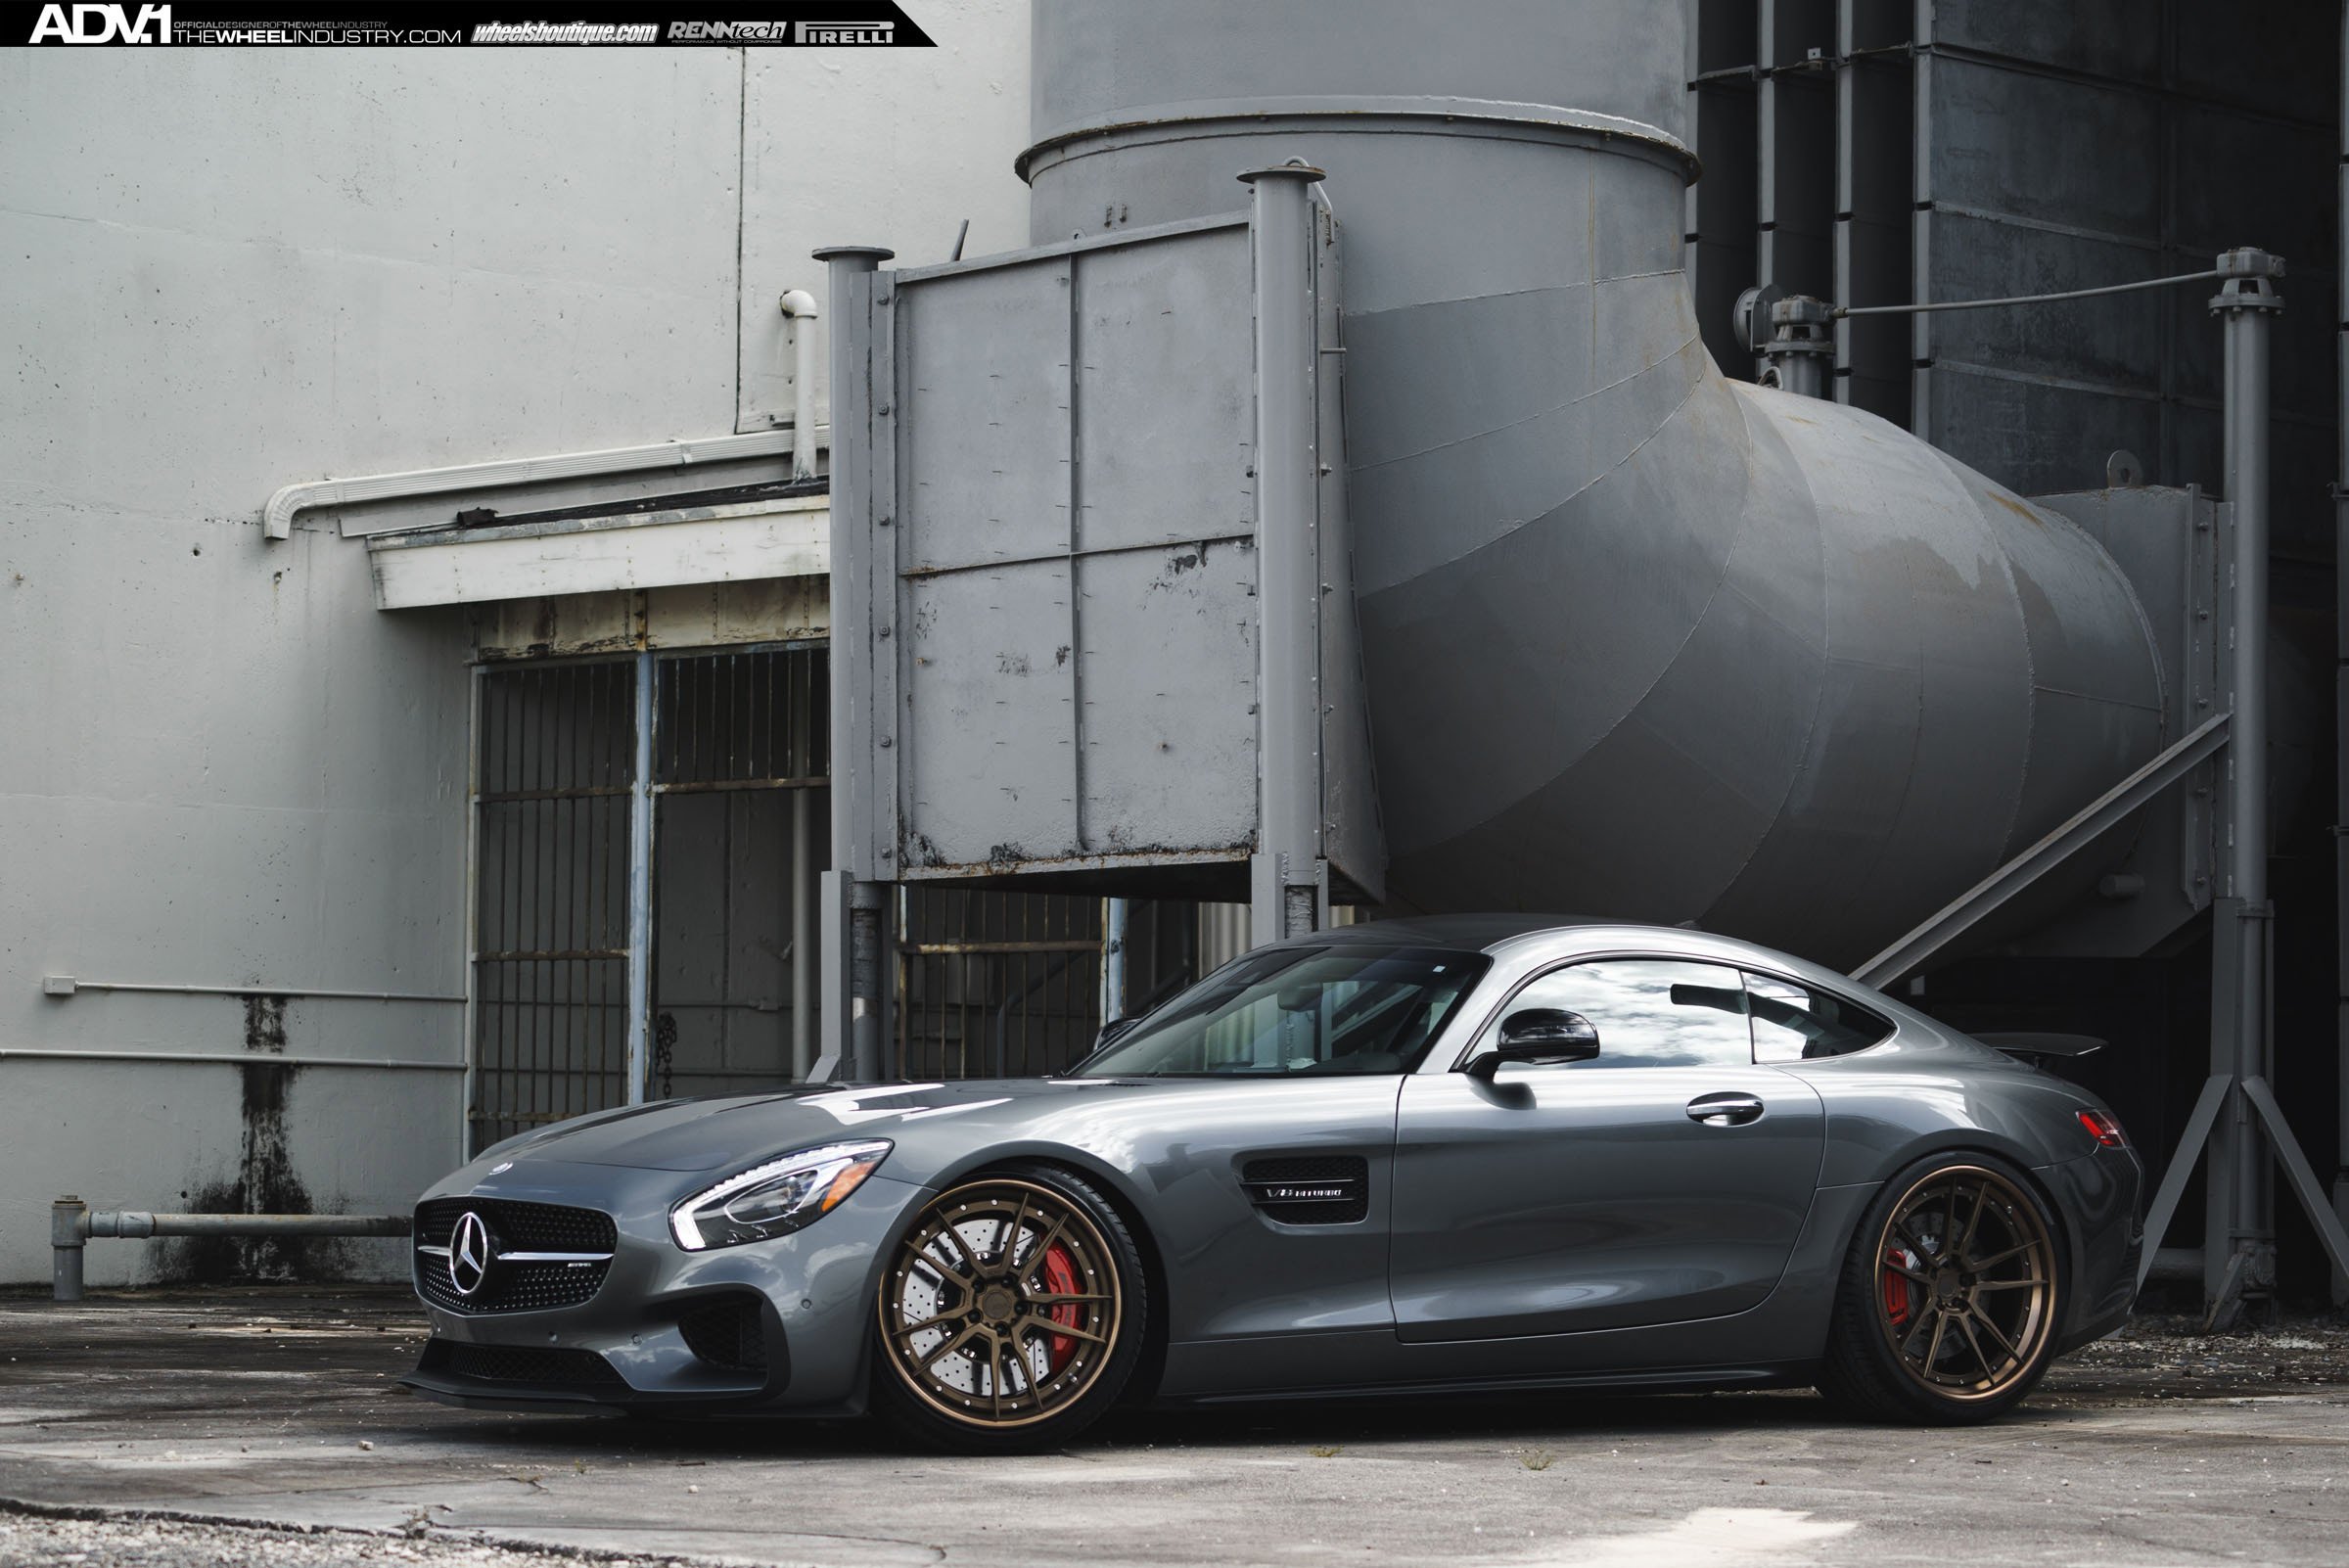 adv, 1, Wheels, Mercedes, Benz, Amg, Gt s, Edition 1, Coupe, Cars, Tuning, White Wallpaper